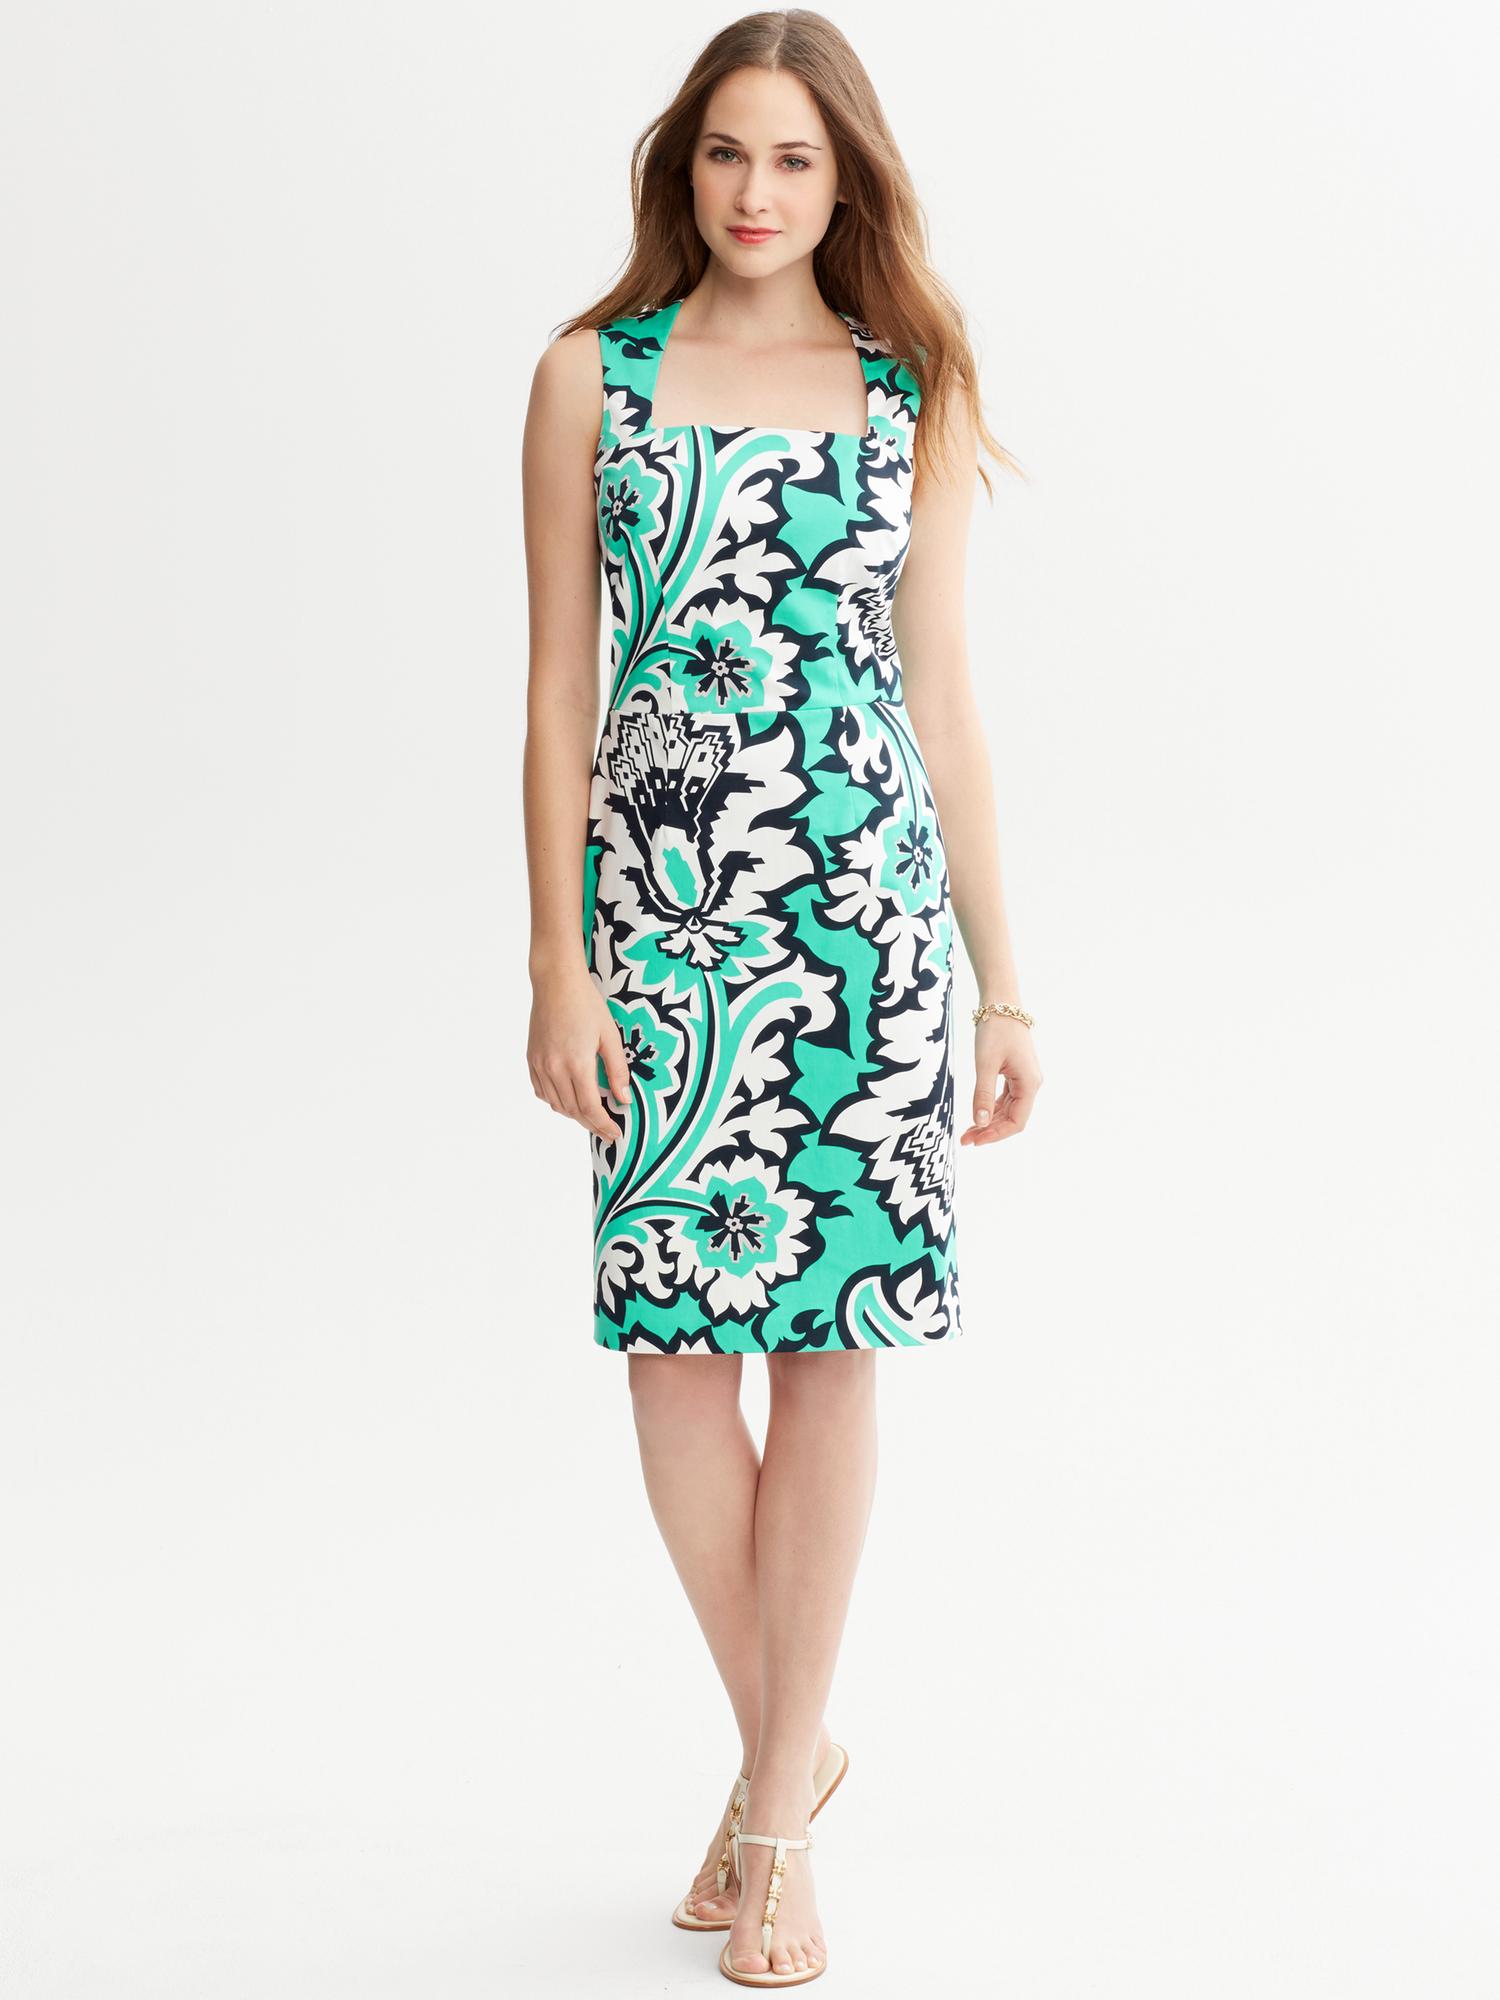 Milly Collection Eden Rock Printed Dress